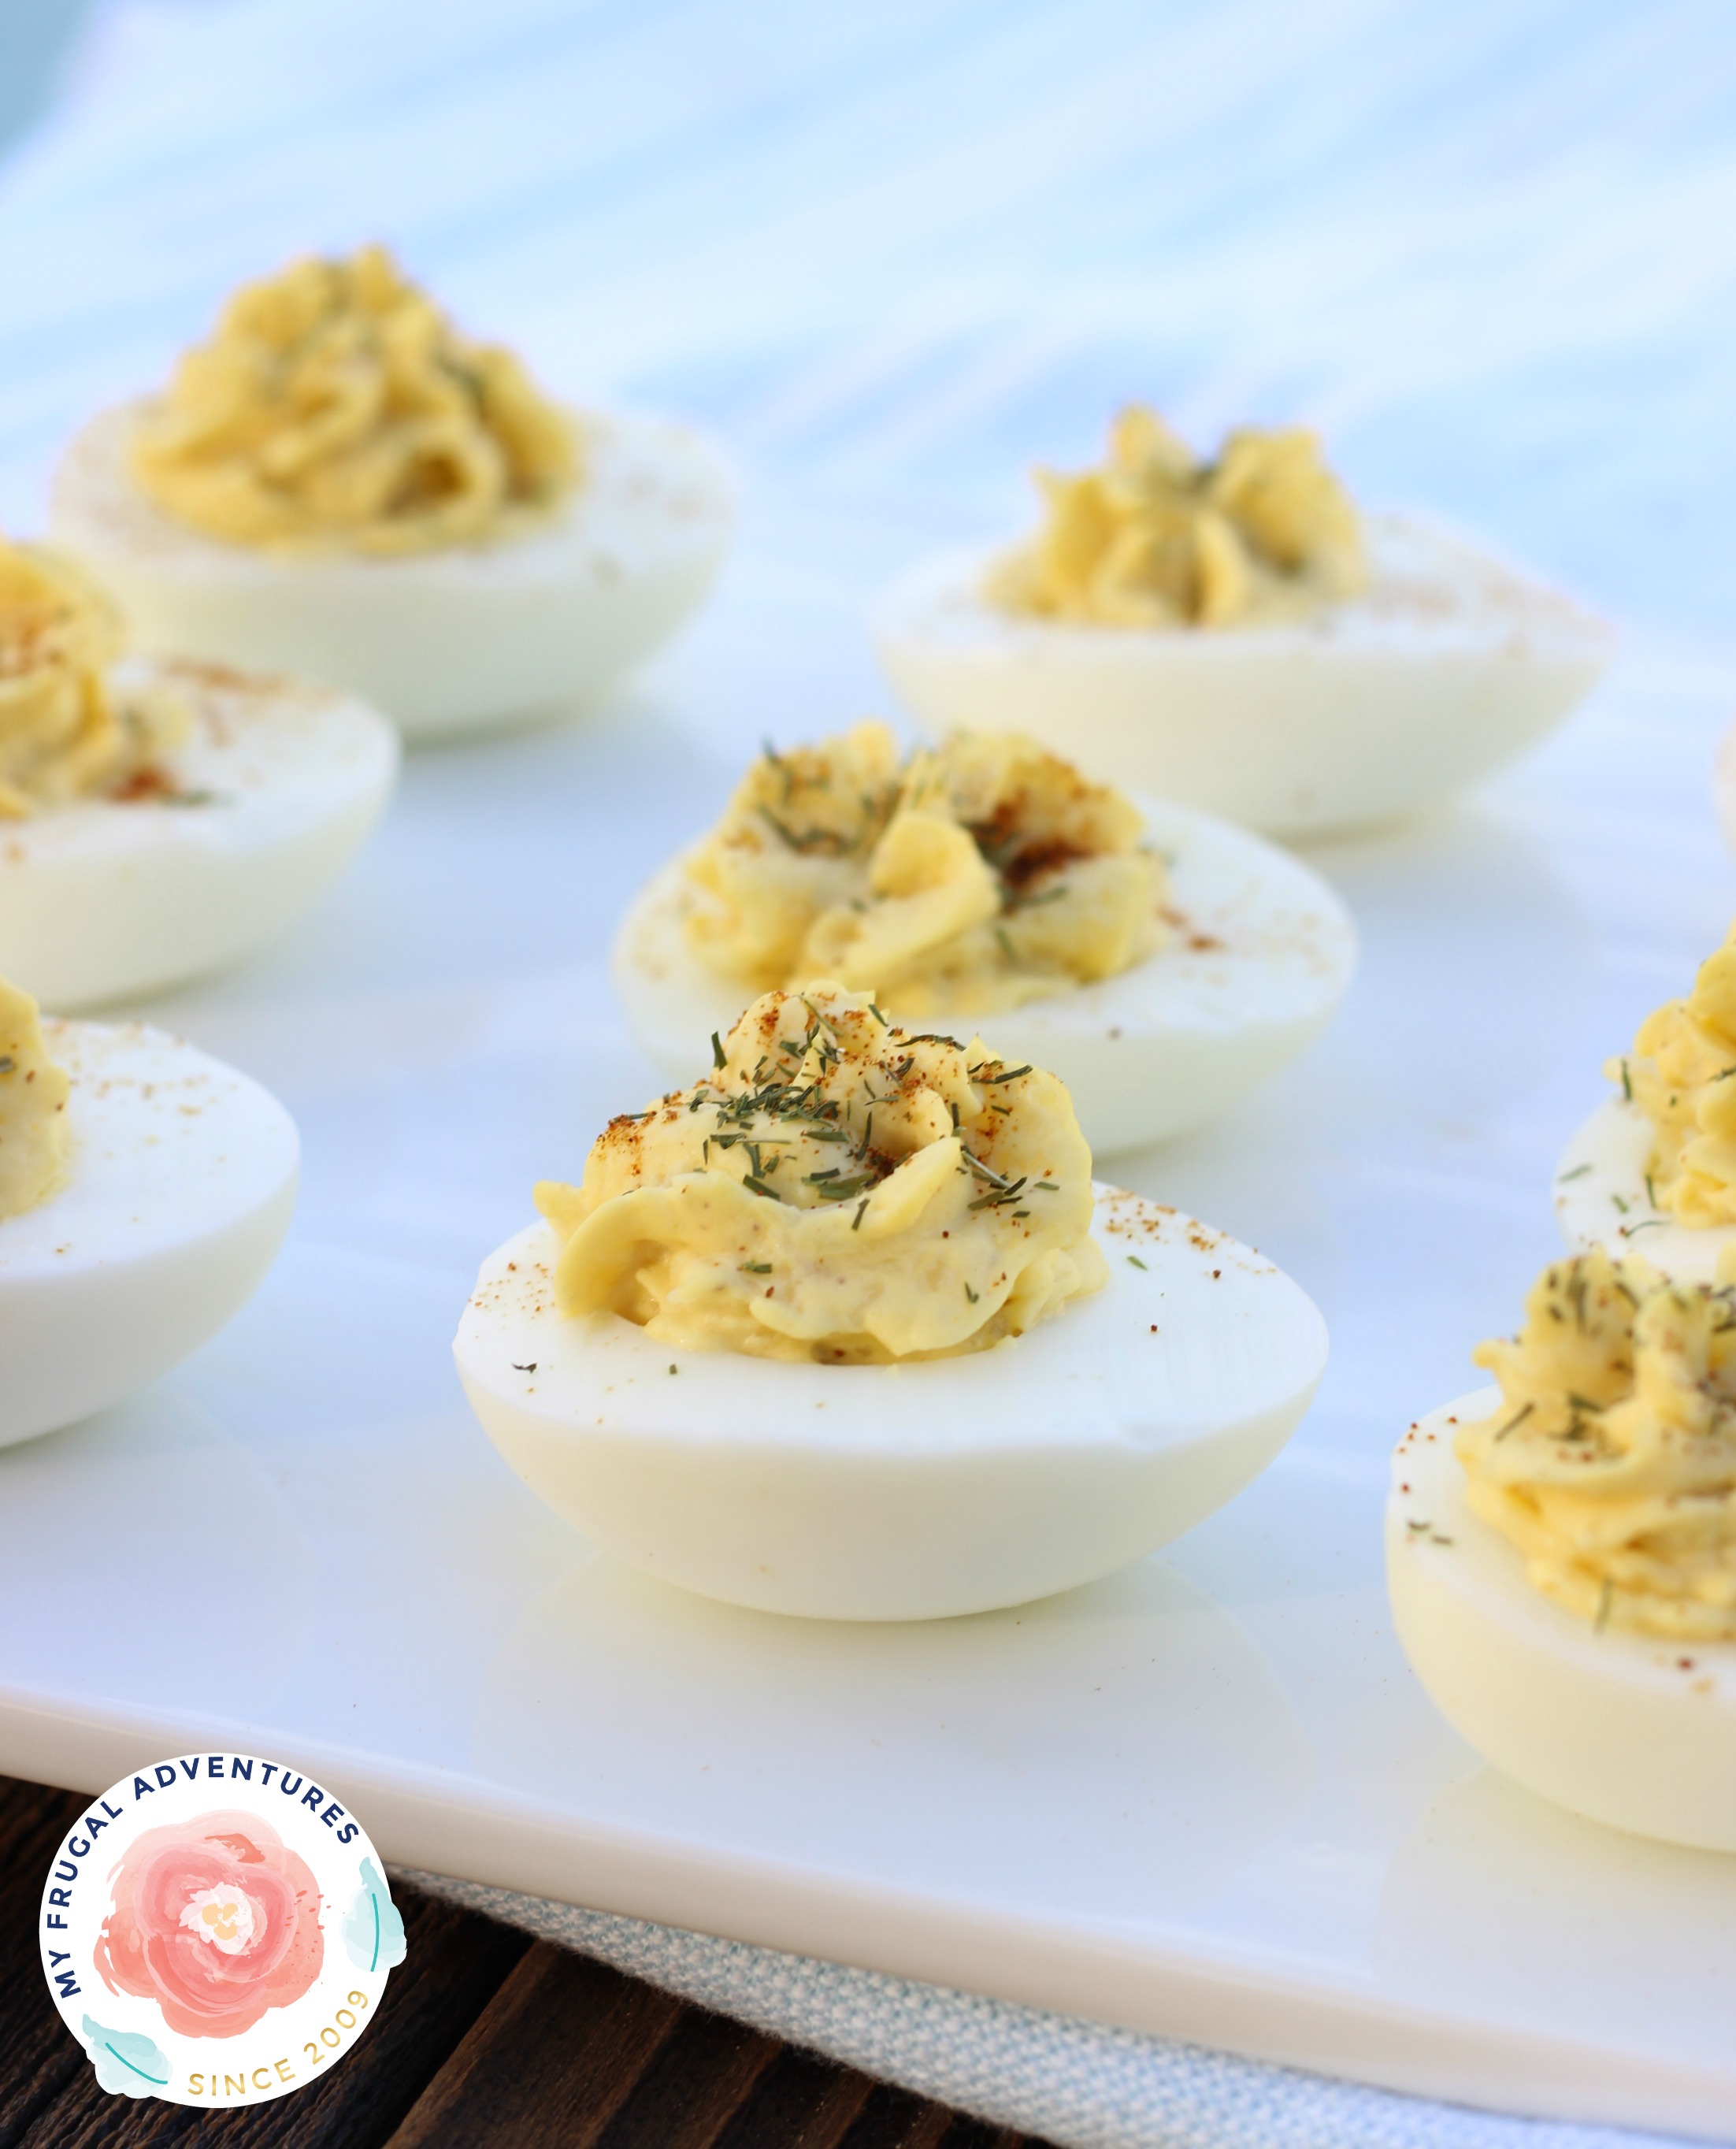 Low Fat Deviled Eggs Recipe from My Frugal Adventures